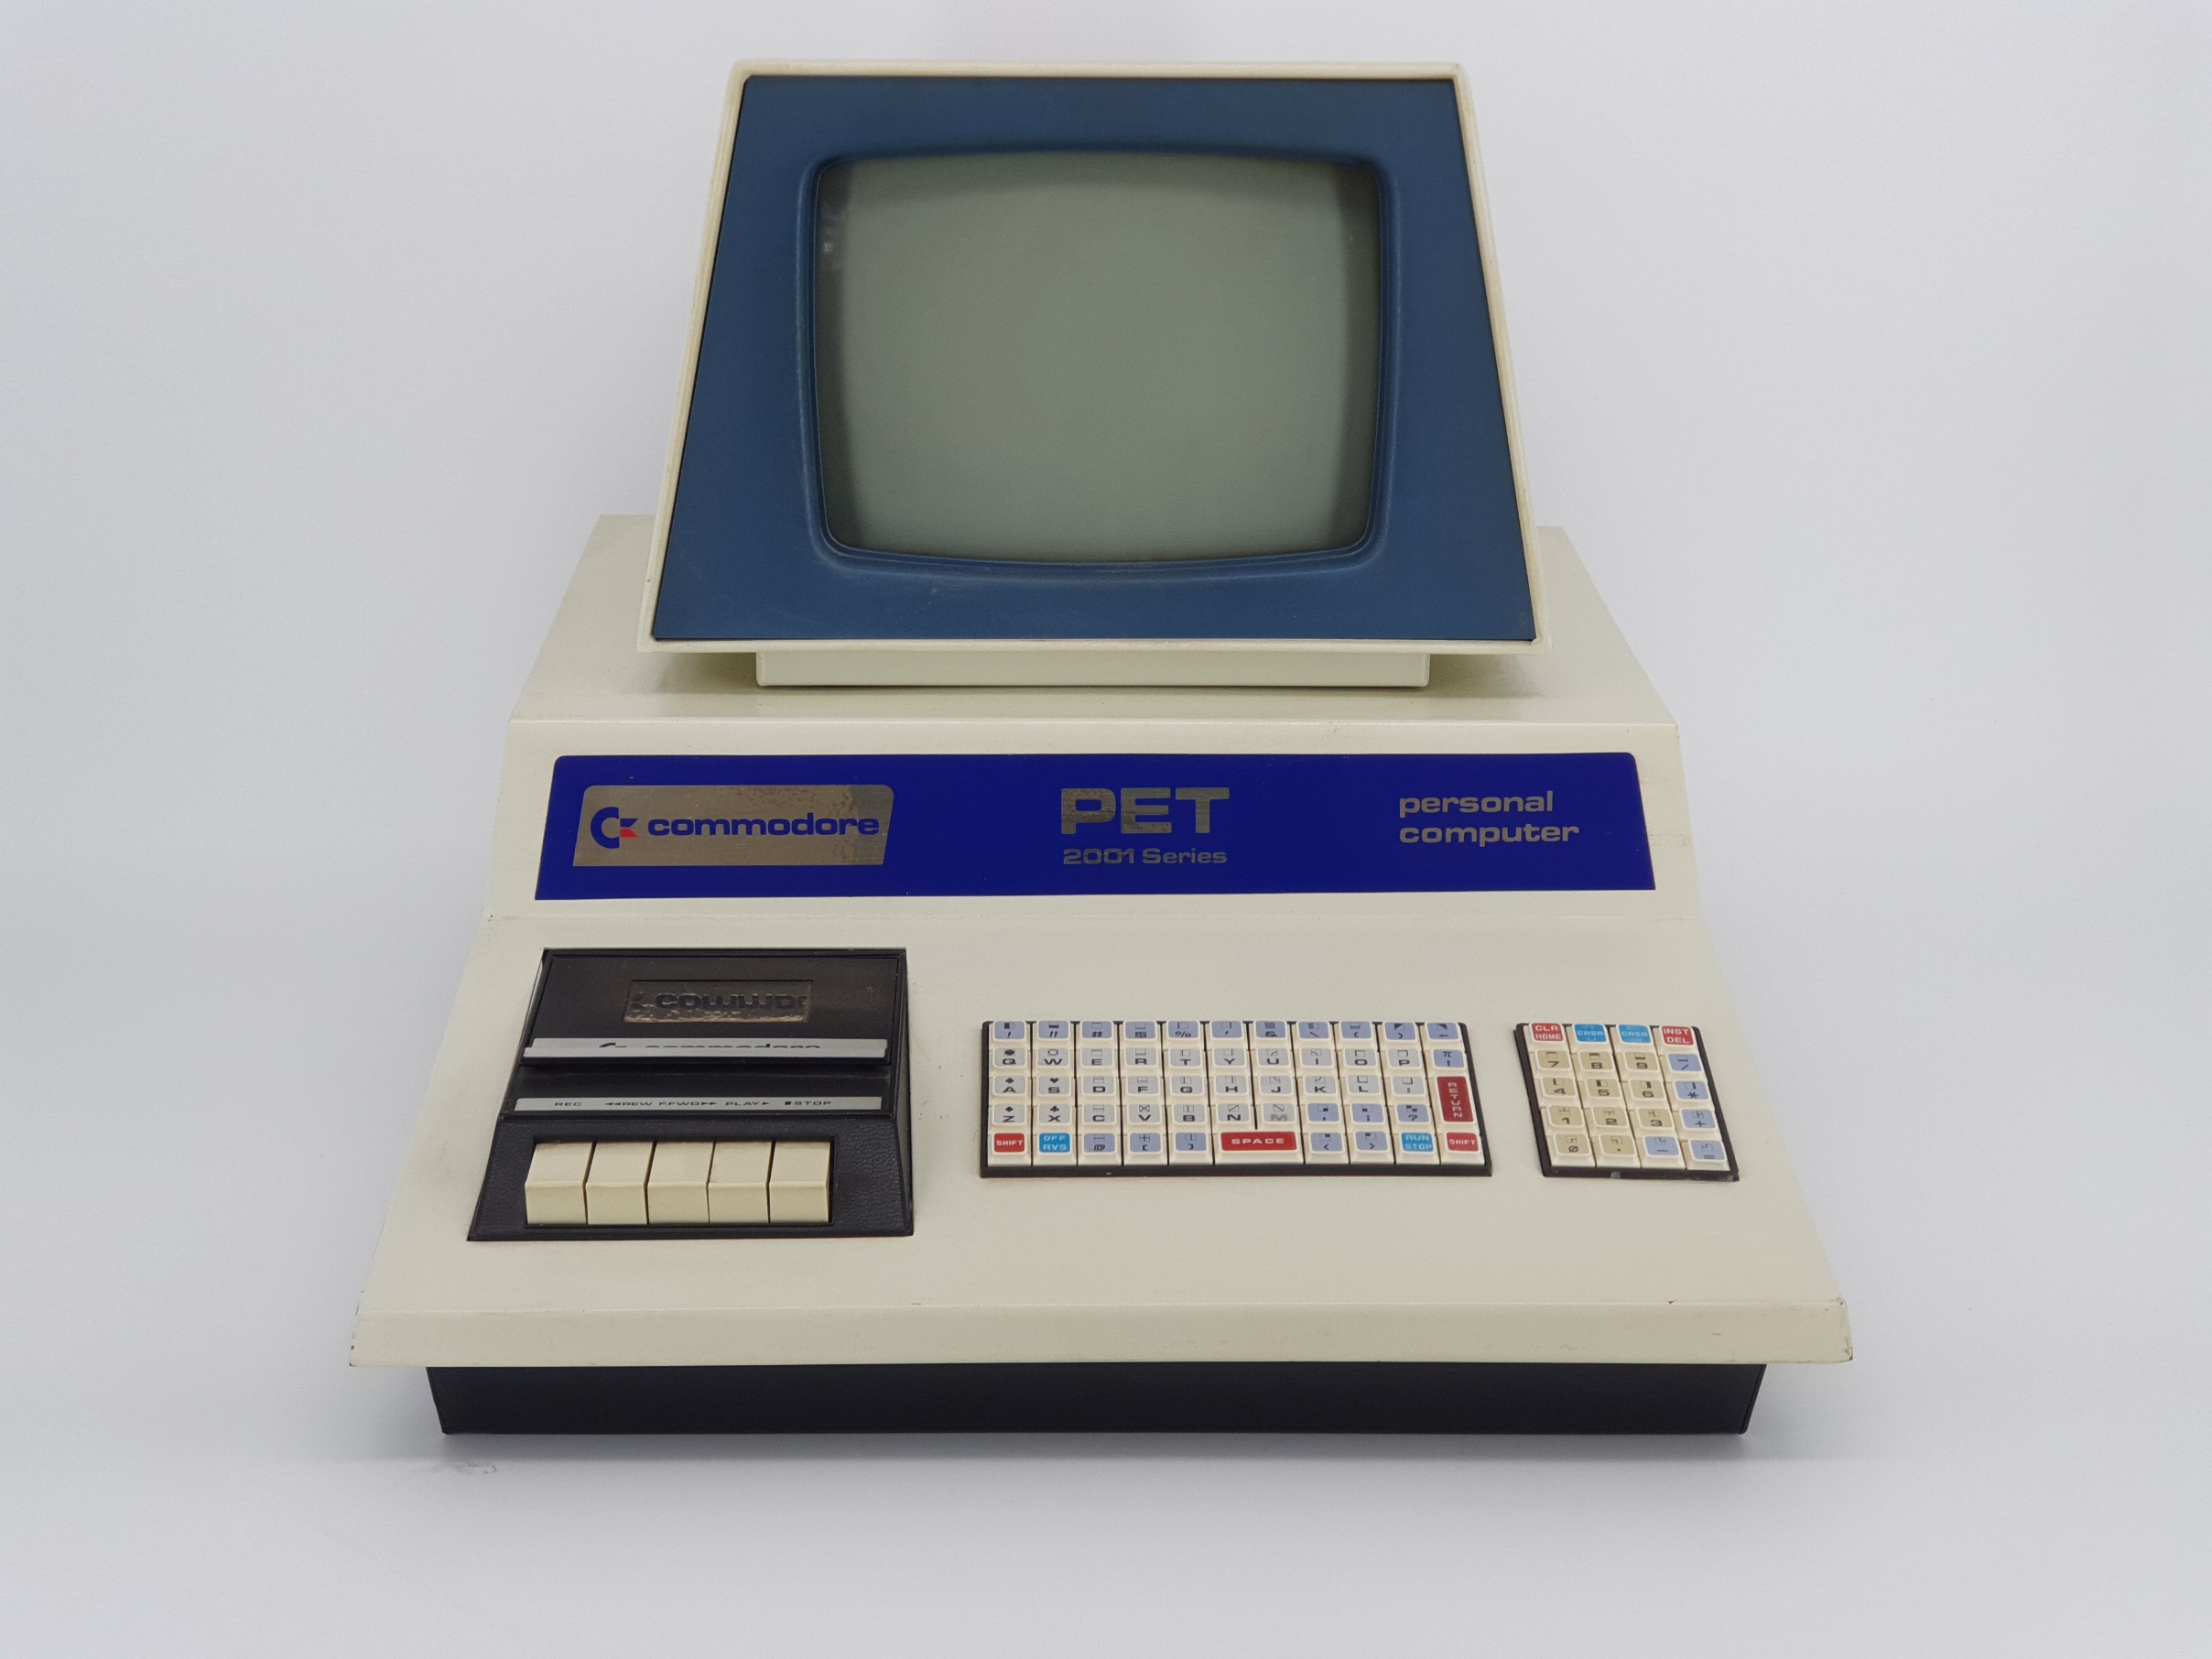 MuseumServicesStoreCommodore PET 2001Search